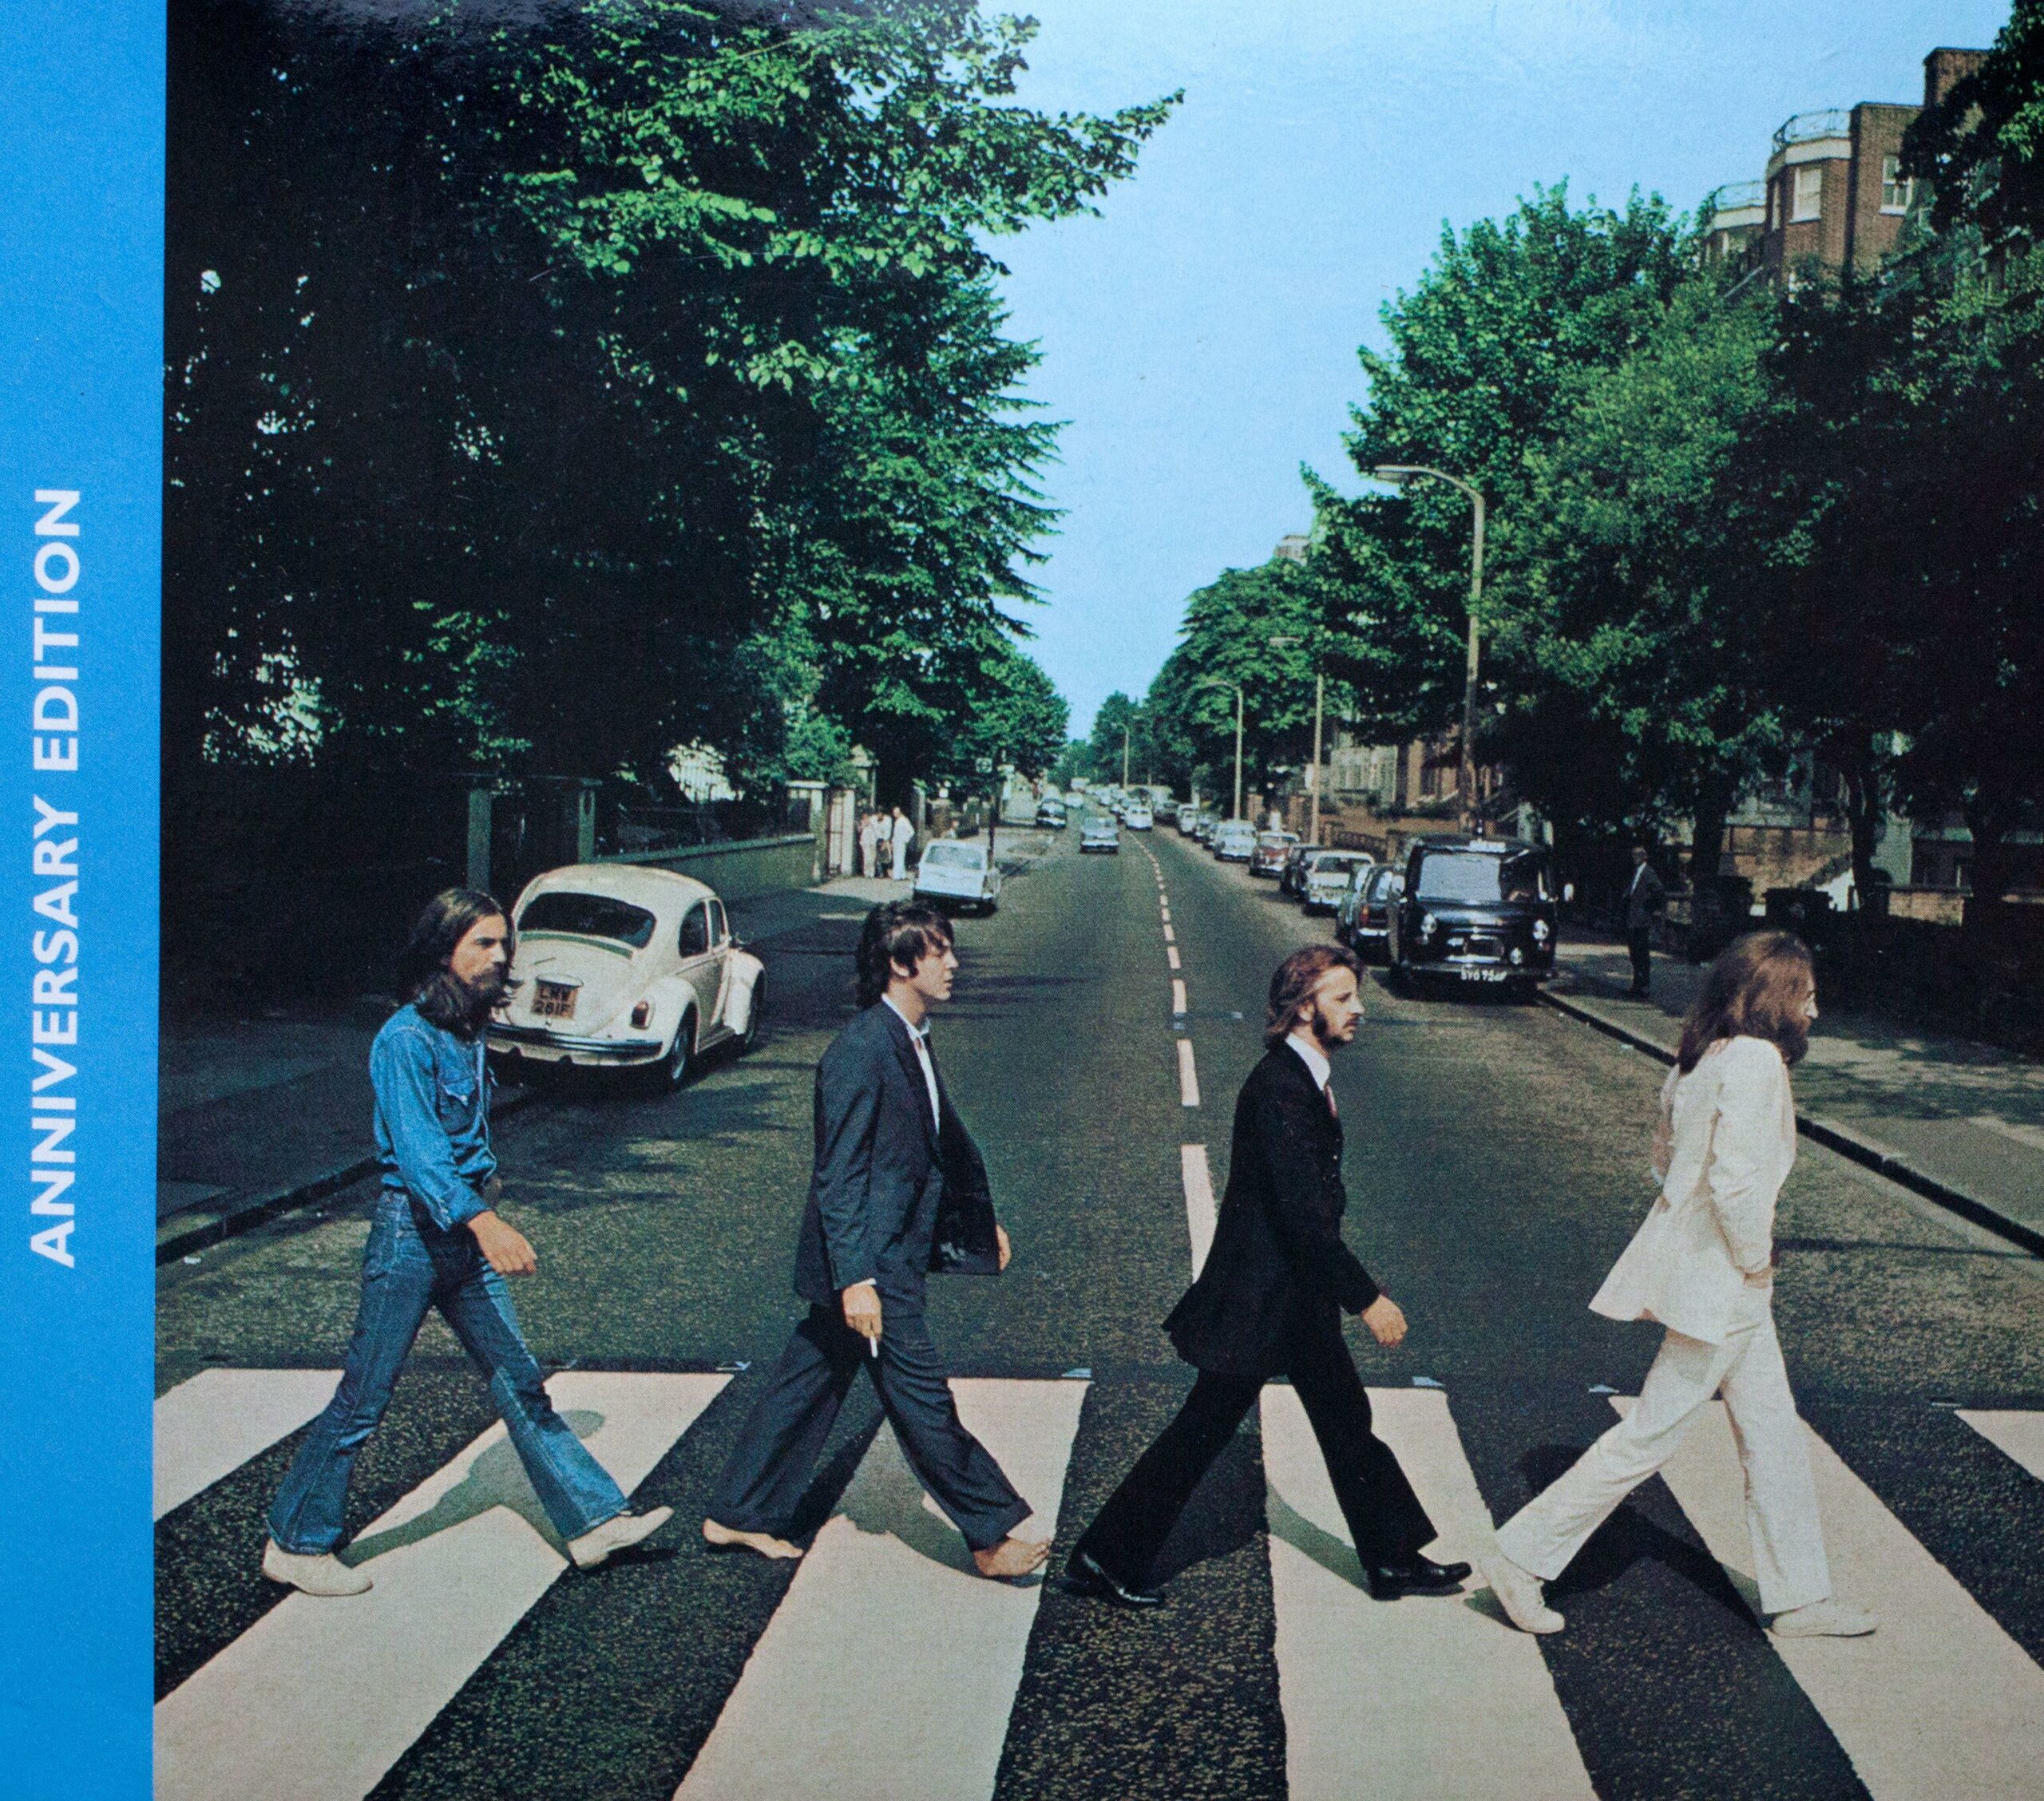 The cd album cover, Abbey Road by The Beatles